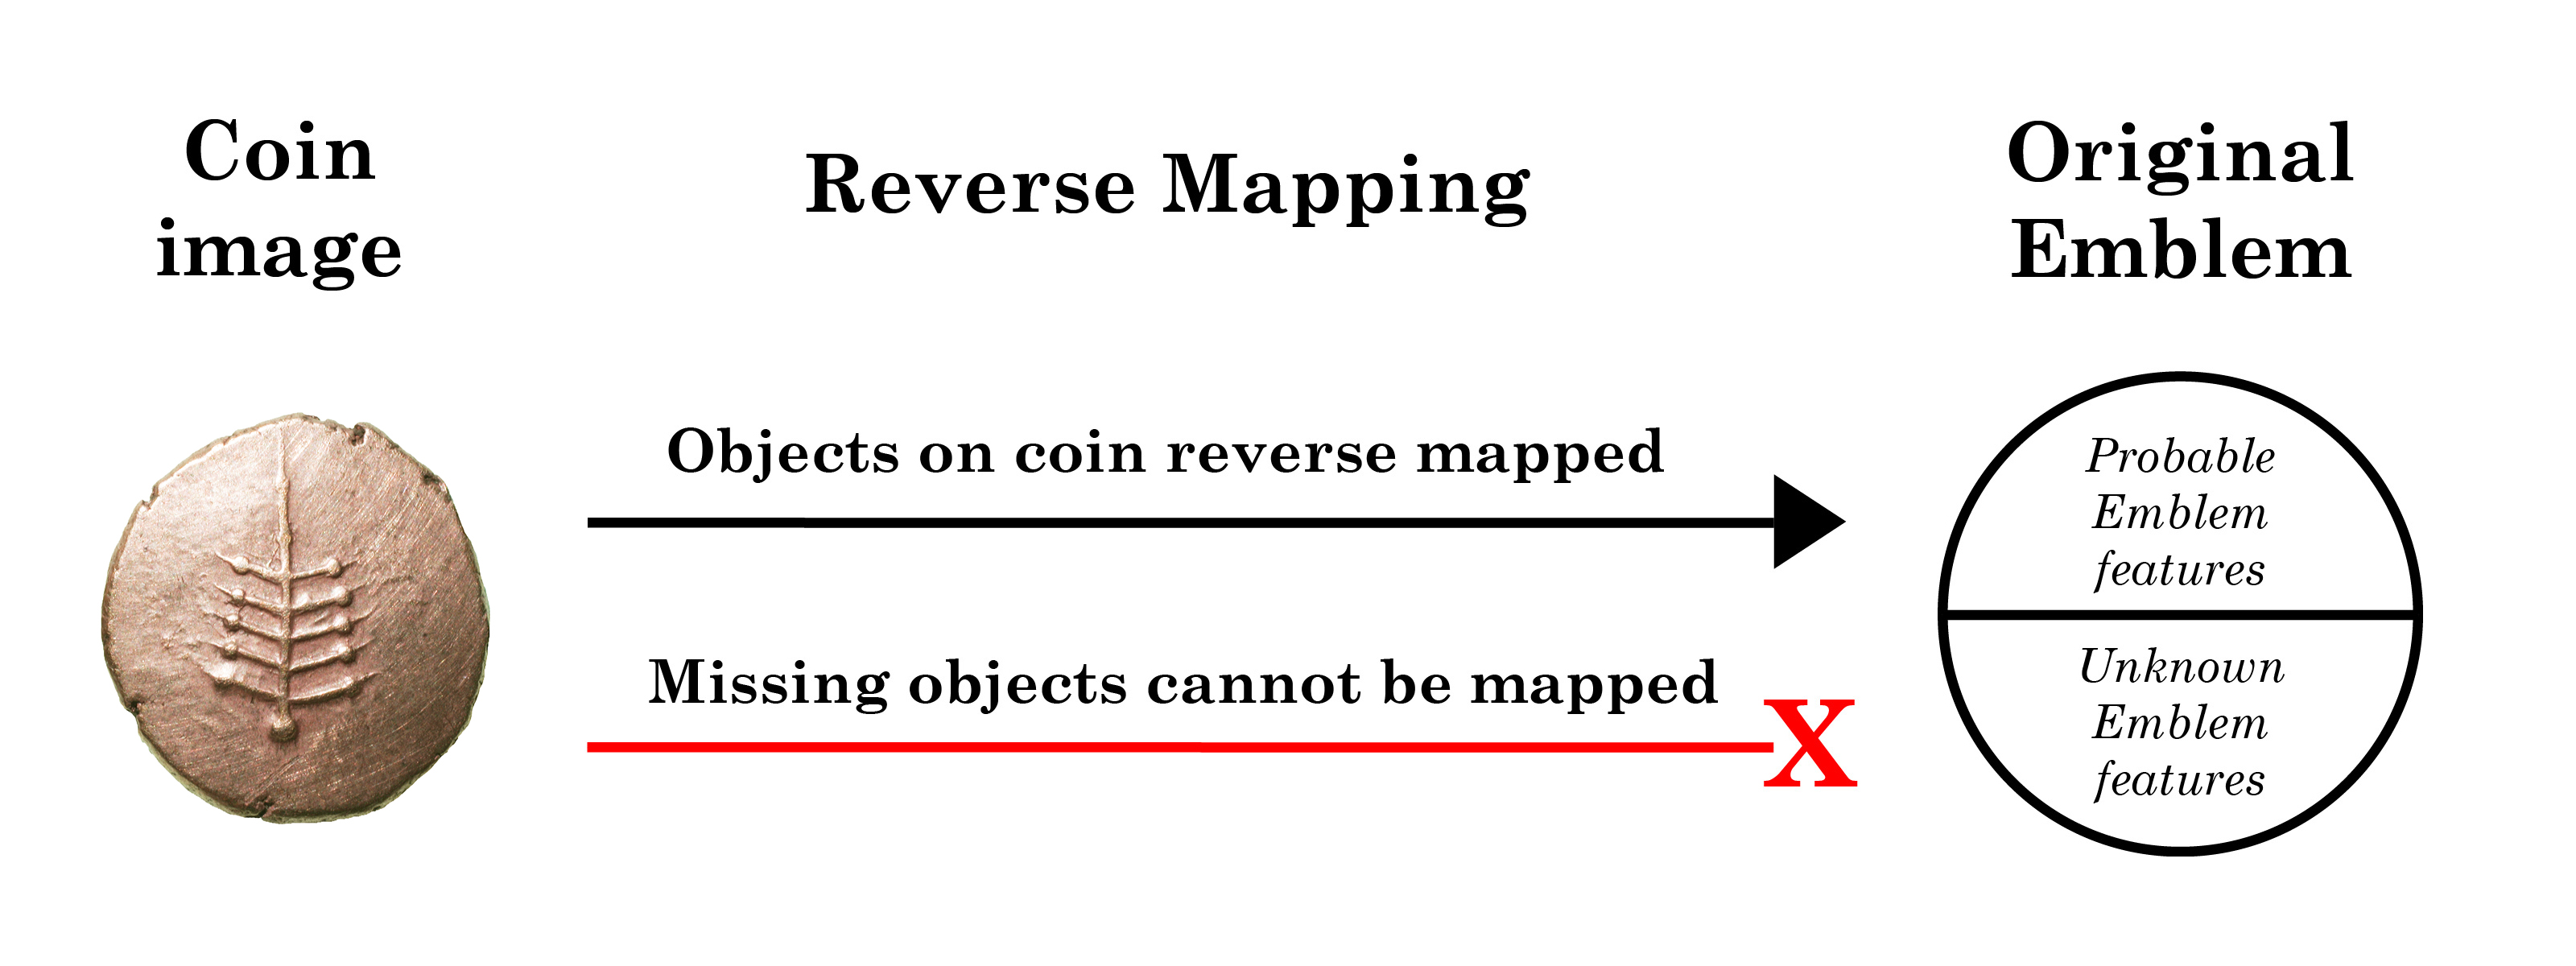 Reverse Mapping